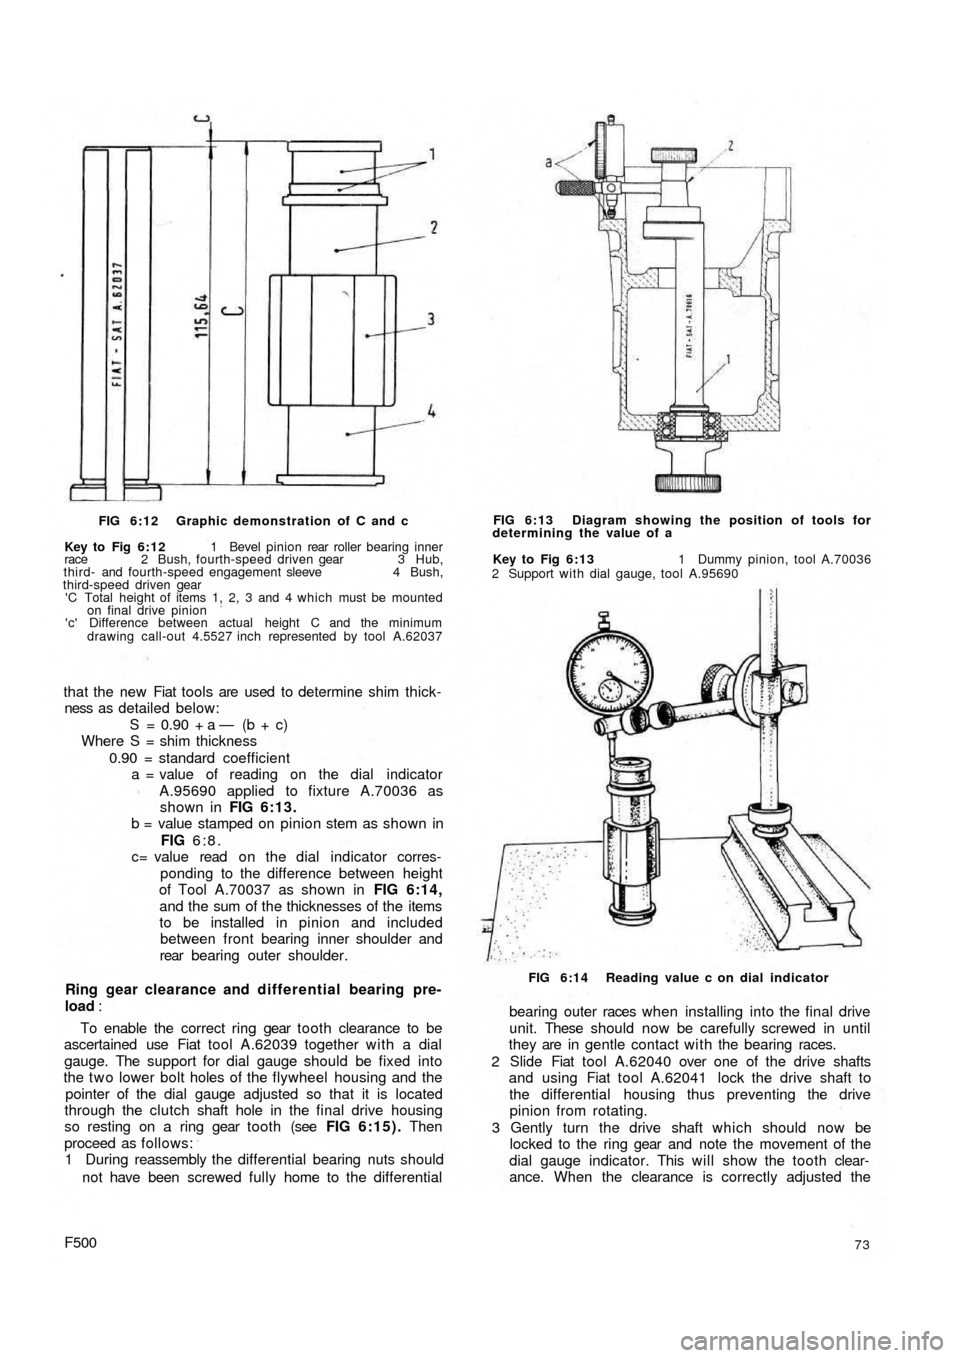 FIAT 500 1960 1.G Workshop Manual FIG 6:12 Graphic demonstration  of C and c
Key to Fig 6:12 1 Bevel pinion rear roller bearing inner
race 2 Bush, fourth-speed driven gear 3 Hub,
third- and fourth-speed engagement sleeve 4 Bush,
third